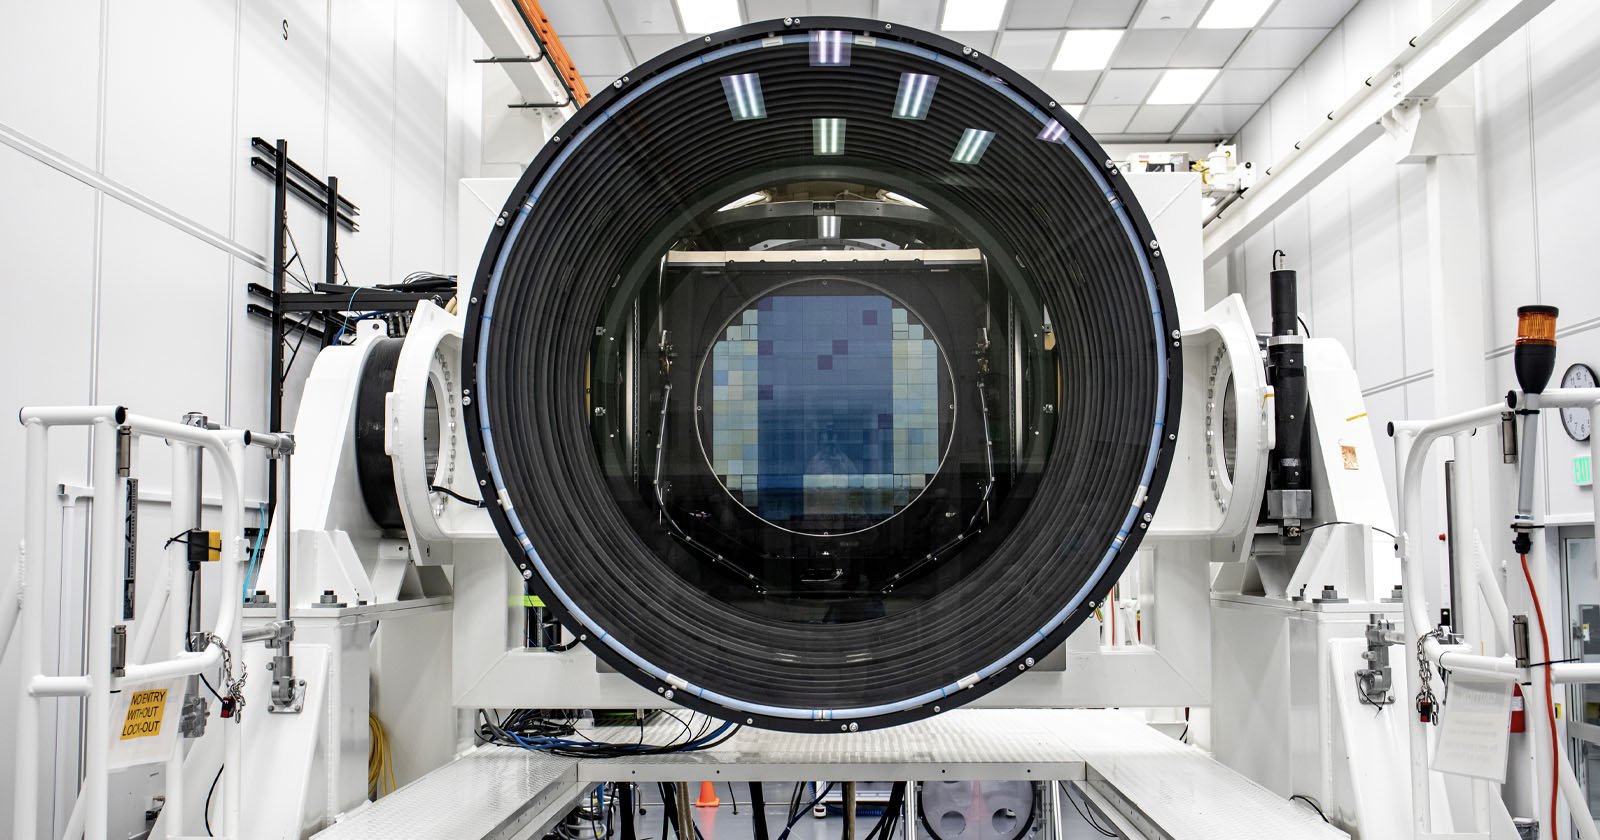 3-200-megapixels-the-world-s-largest-camera-is-almost-complete